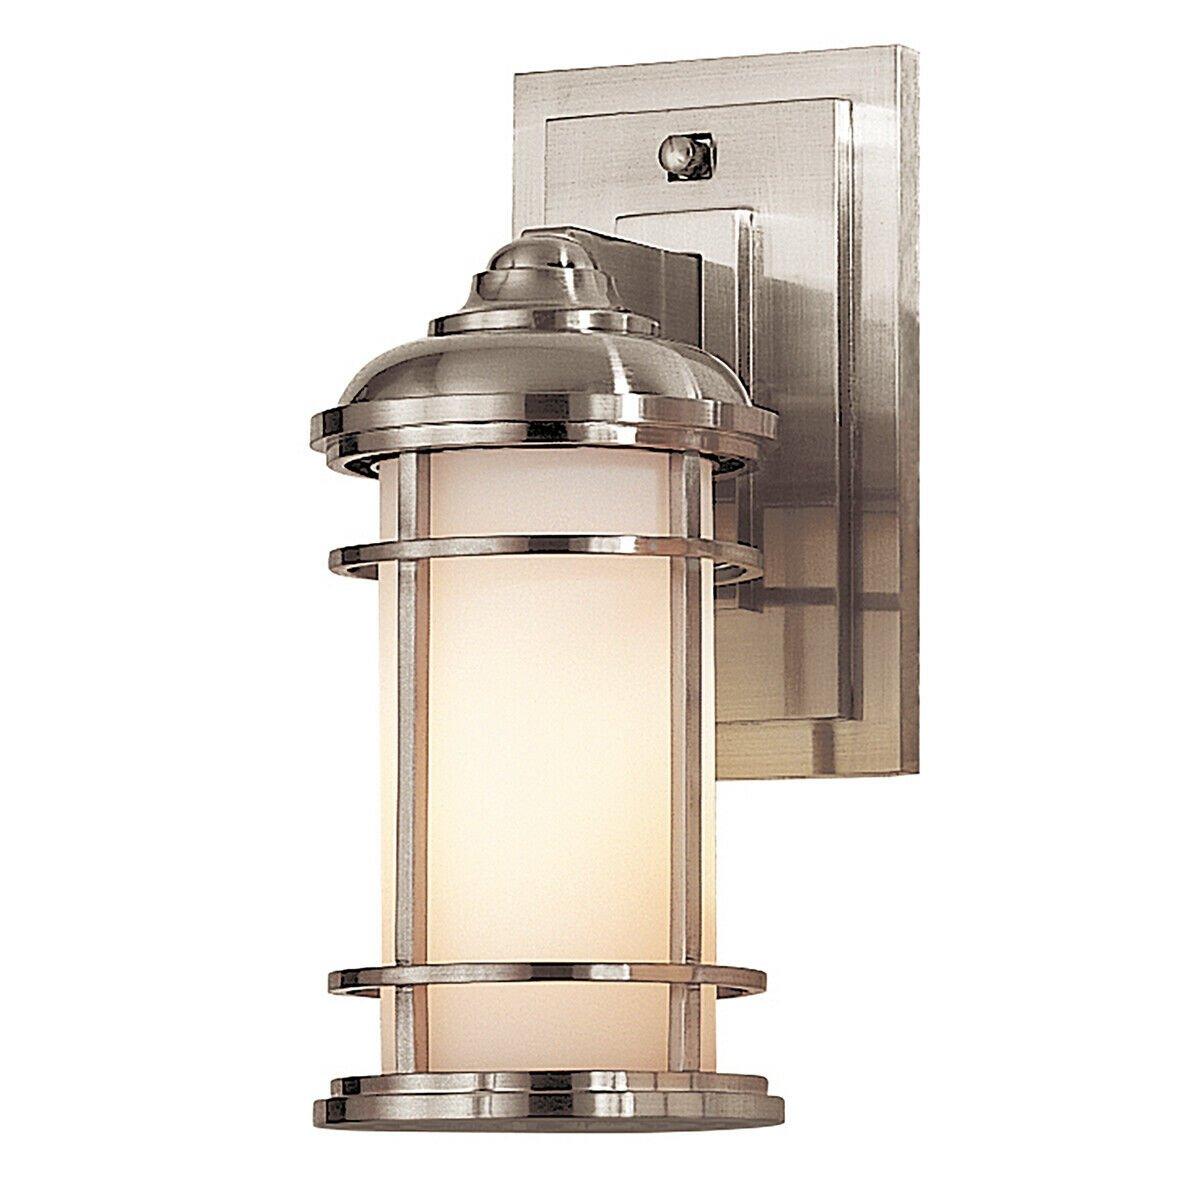 Outdoor IP44 Wall Light Sconce Brushed Steel LED E27 60W Bulb External d00822